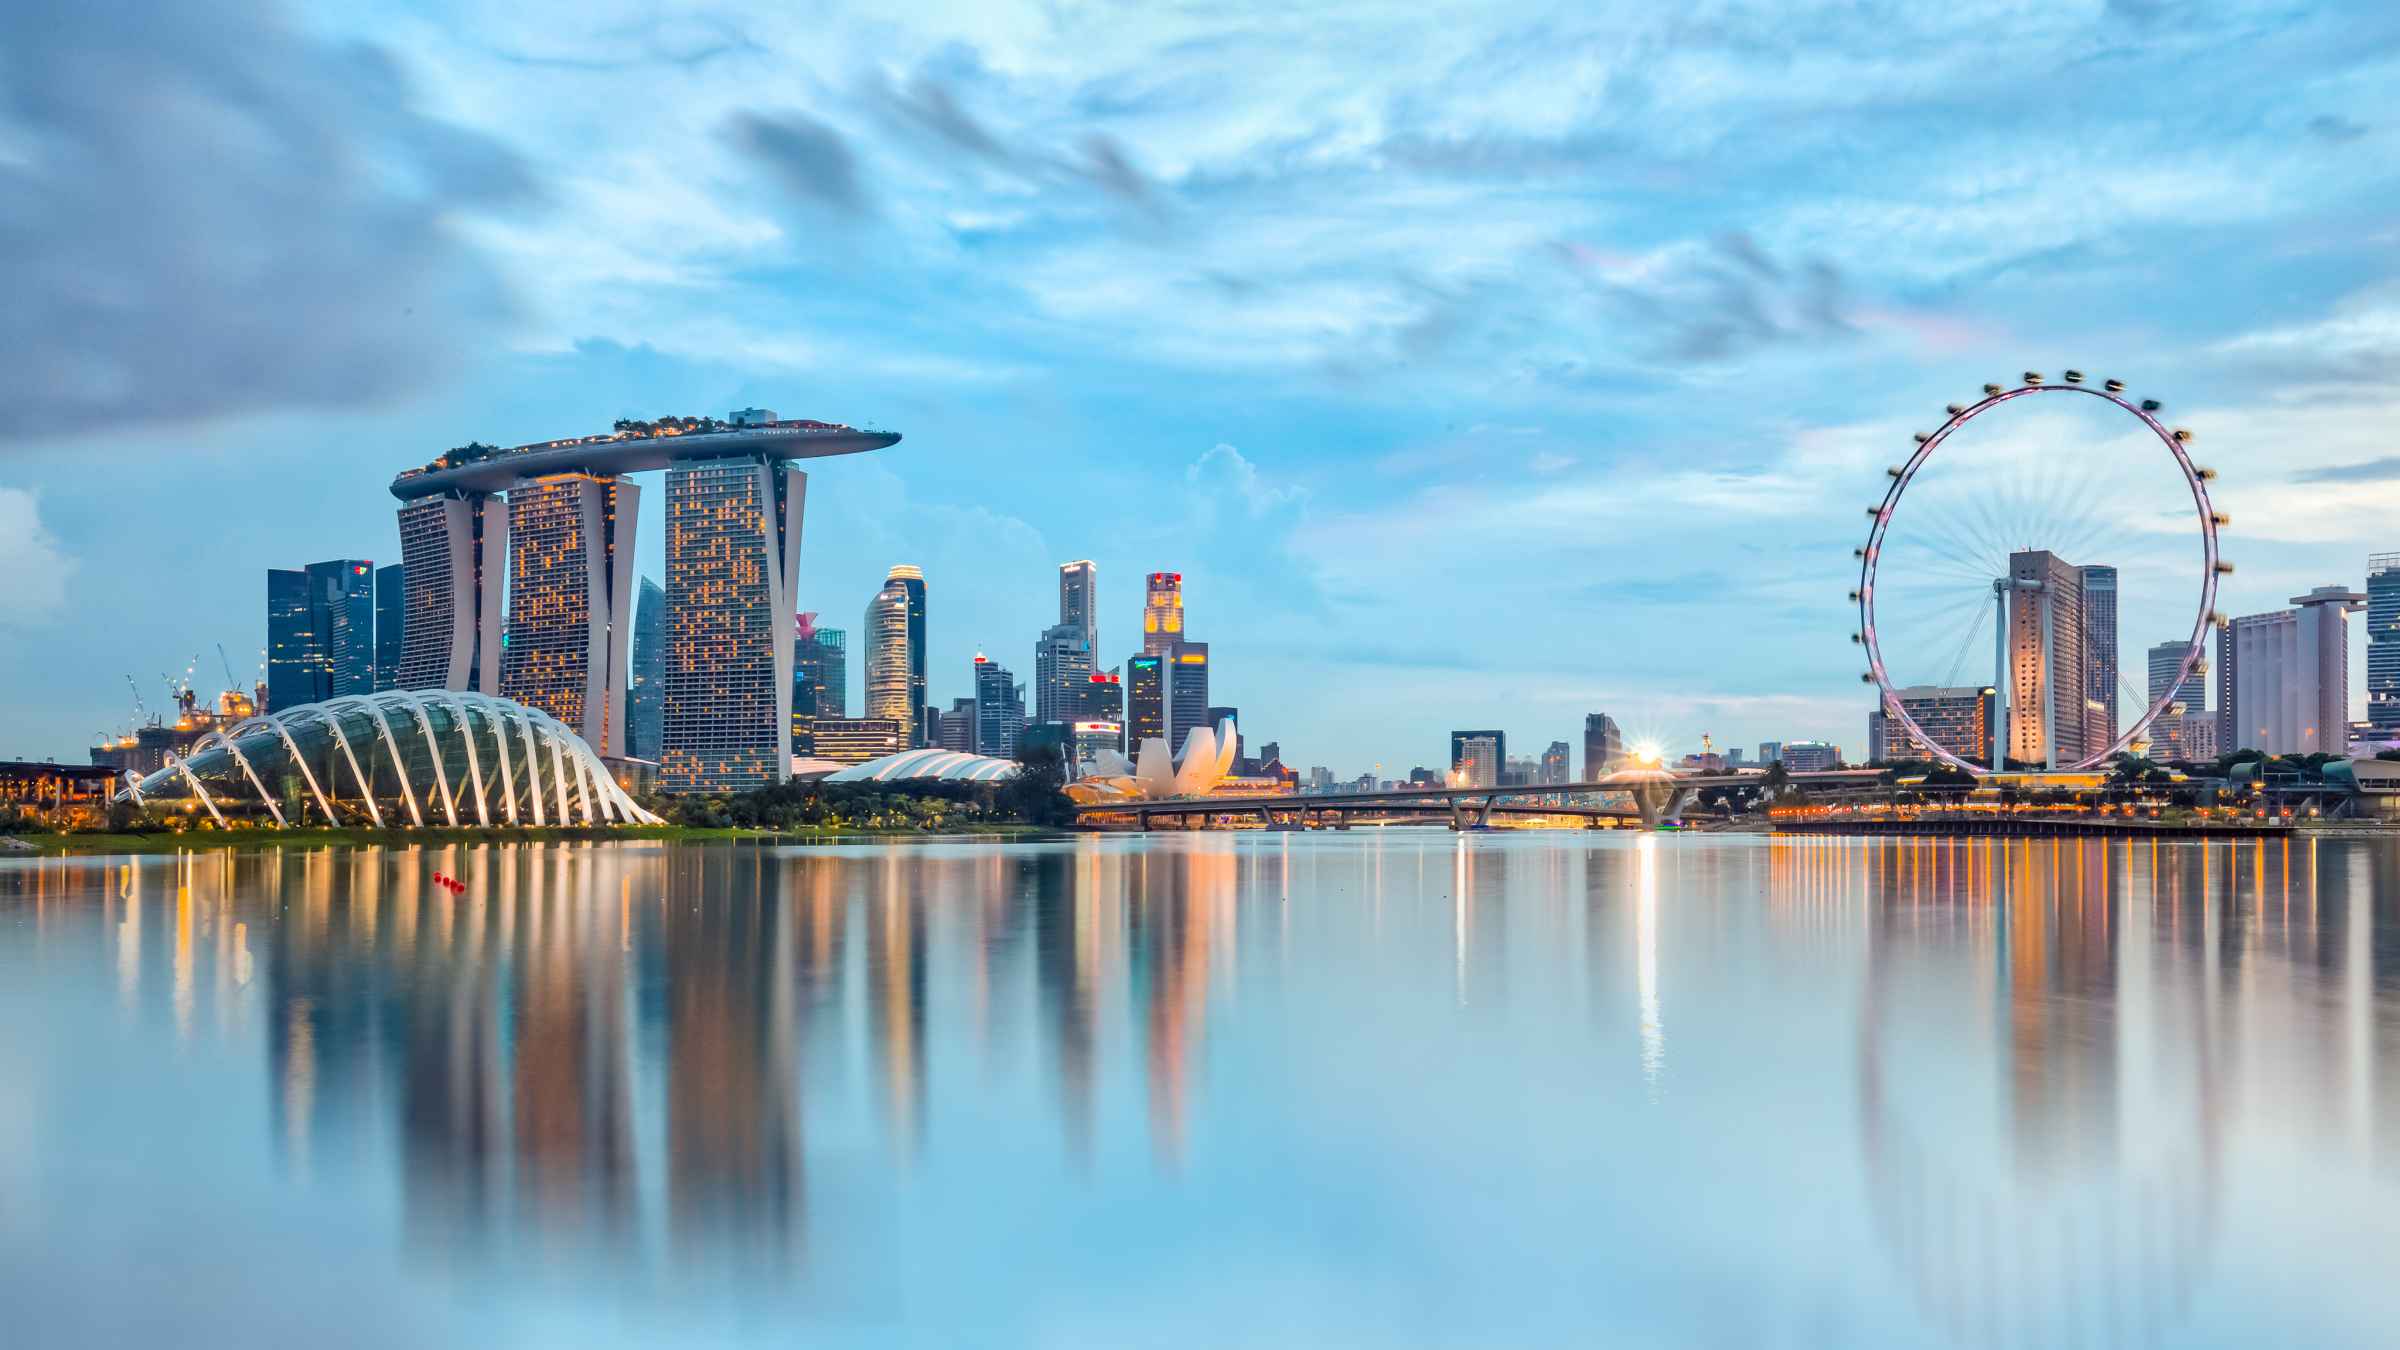 Marina Bay Sands Singapore Cityscape 4K 5K Wallpapers | HD Wallpapers ...